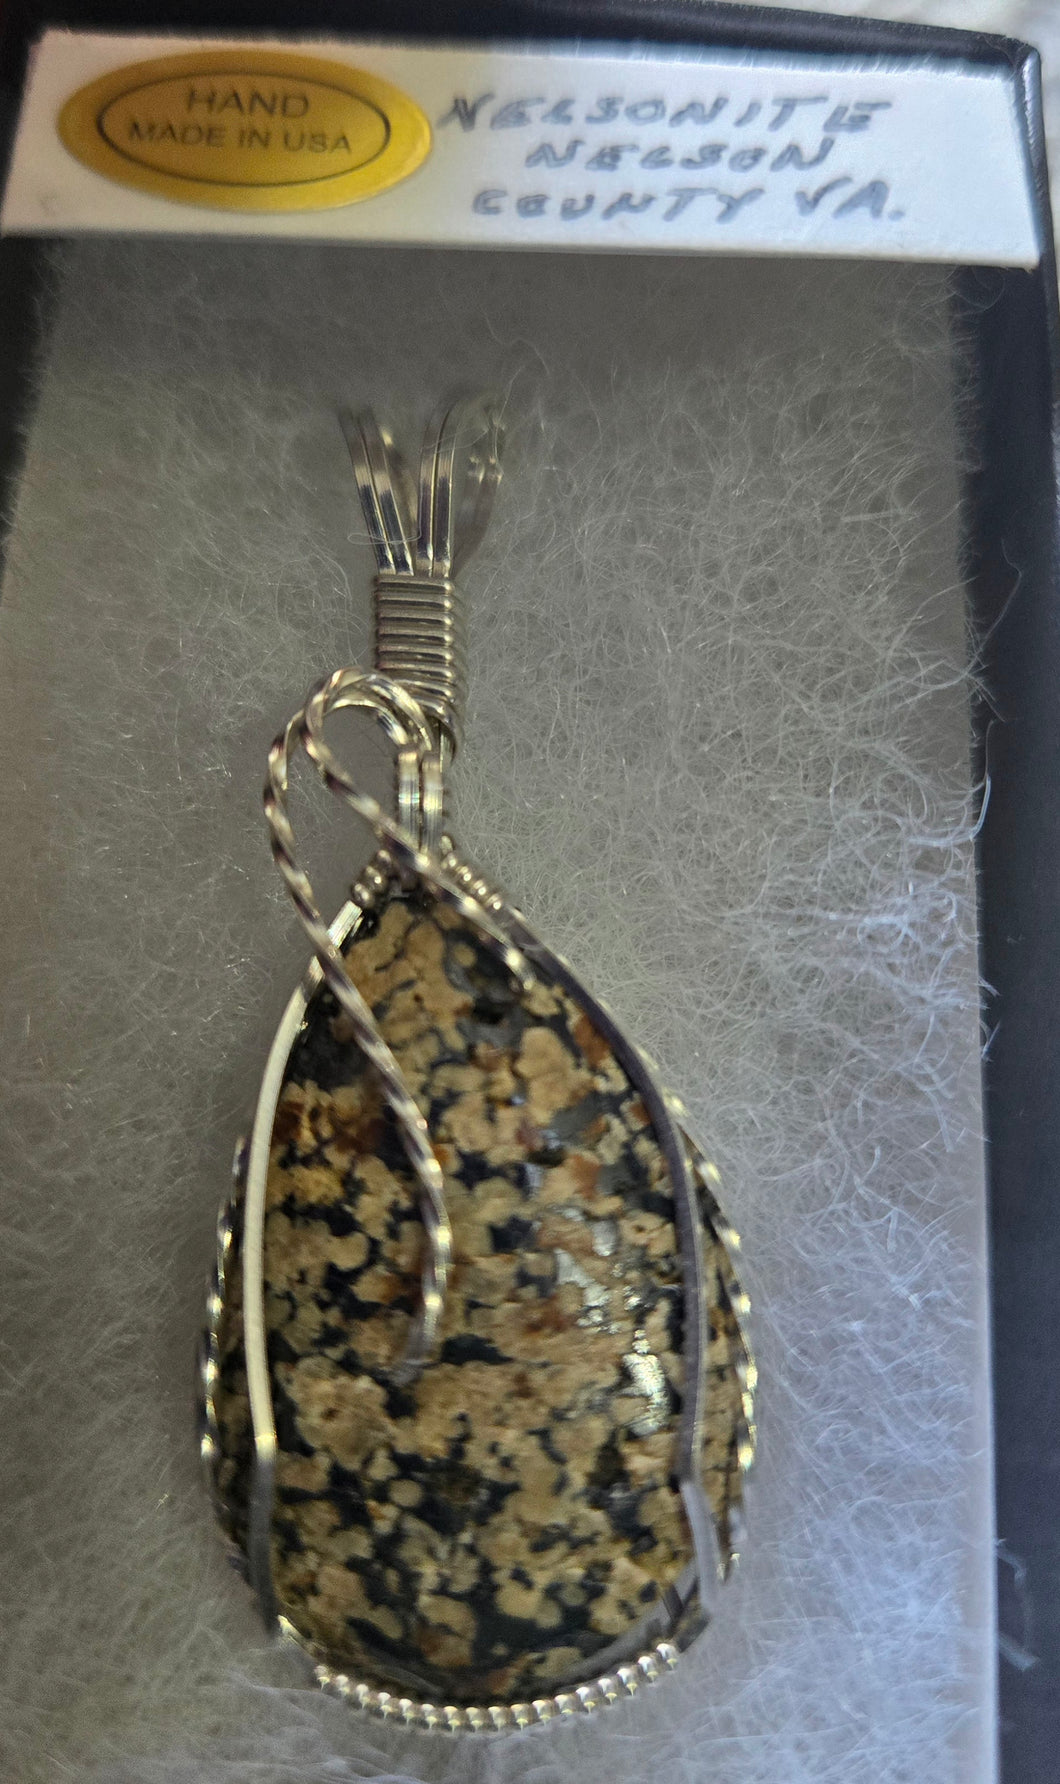 Custom Cut Polished & Wire Wrapped Nelsonite VA State Stone Necklace/Pendant Sterling Silver